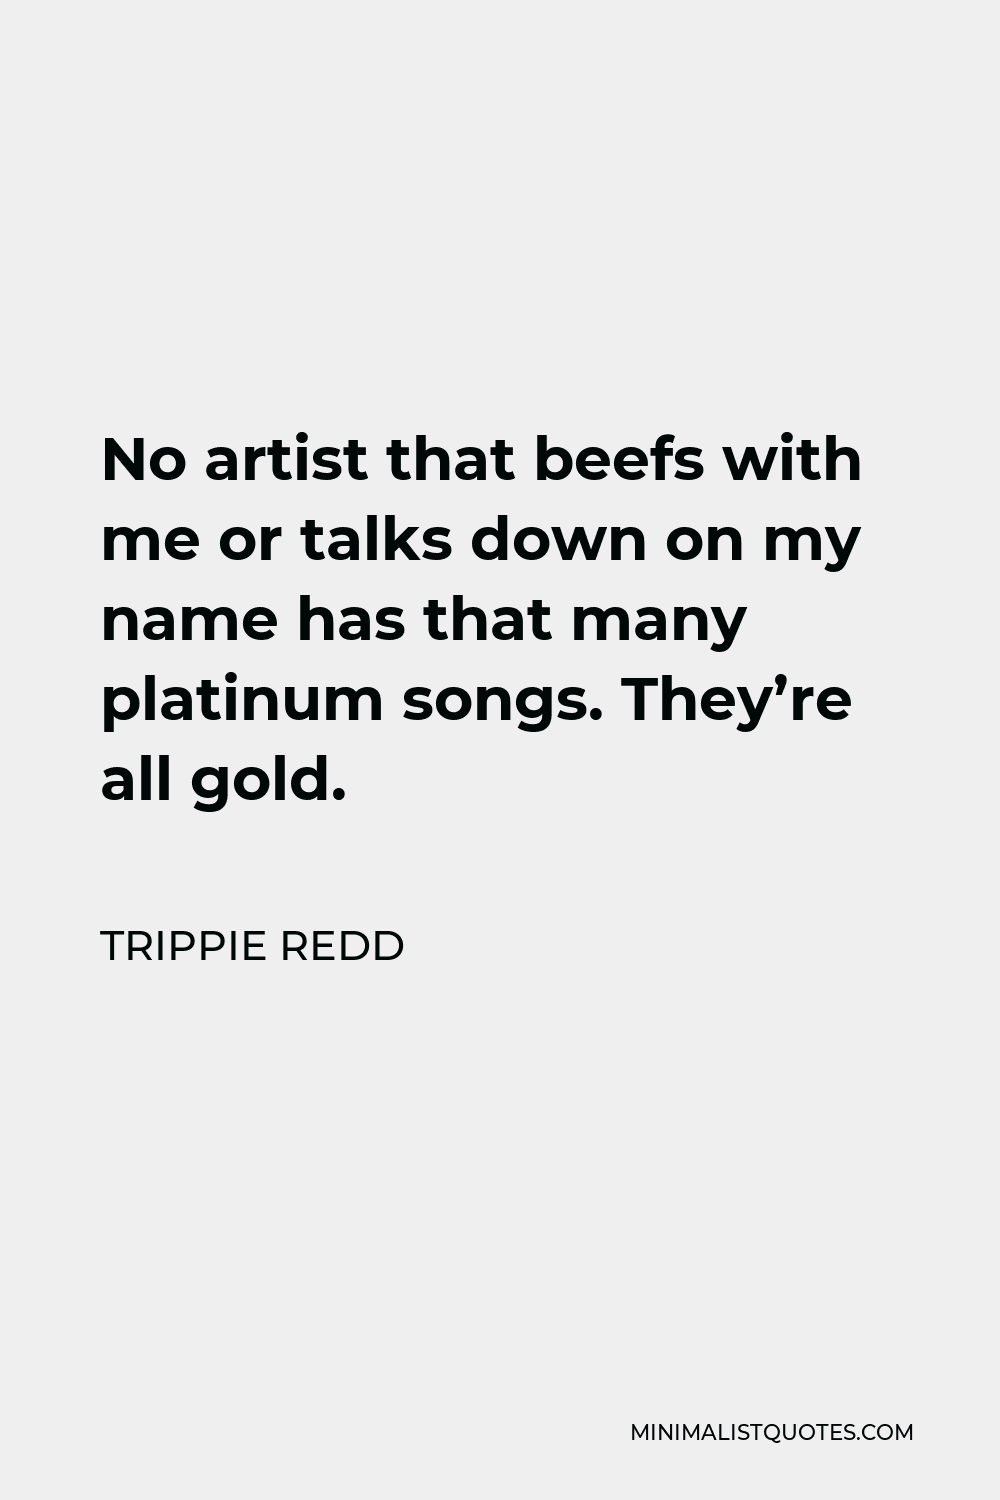 Trippie Redd Quote - No artist that beefs with me or talks down on my name has that many platinum songs. They’re all gold.